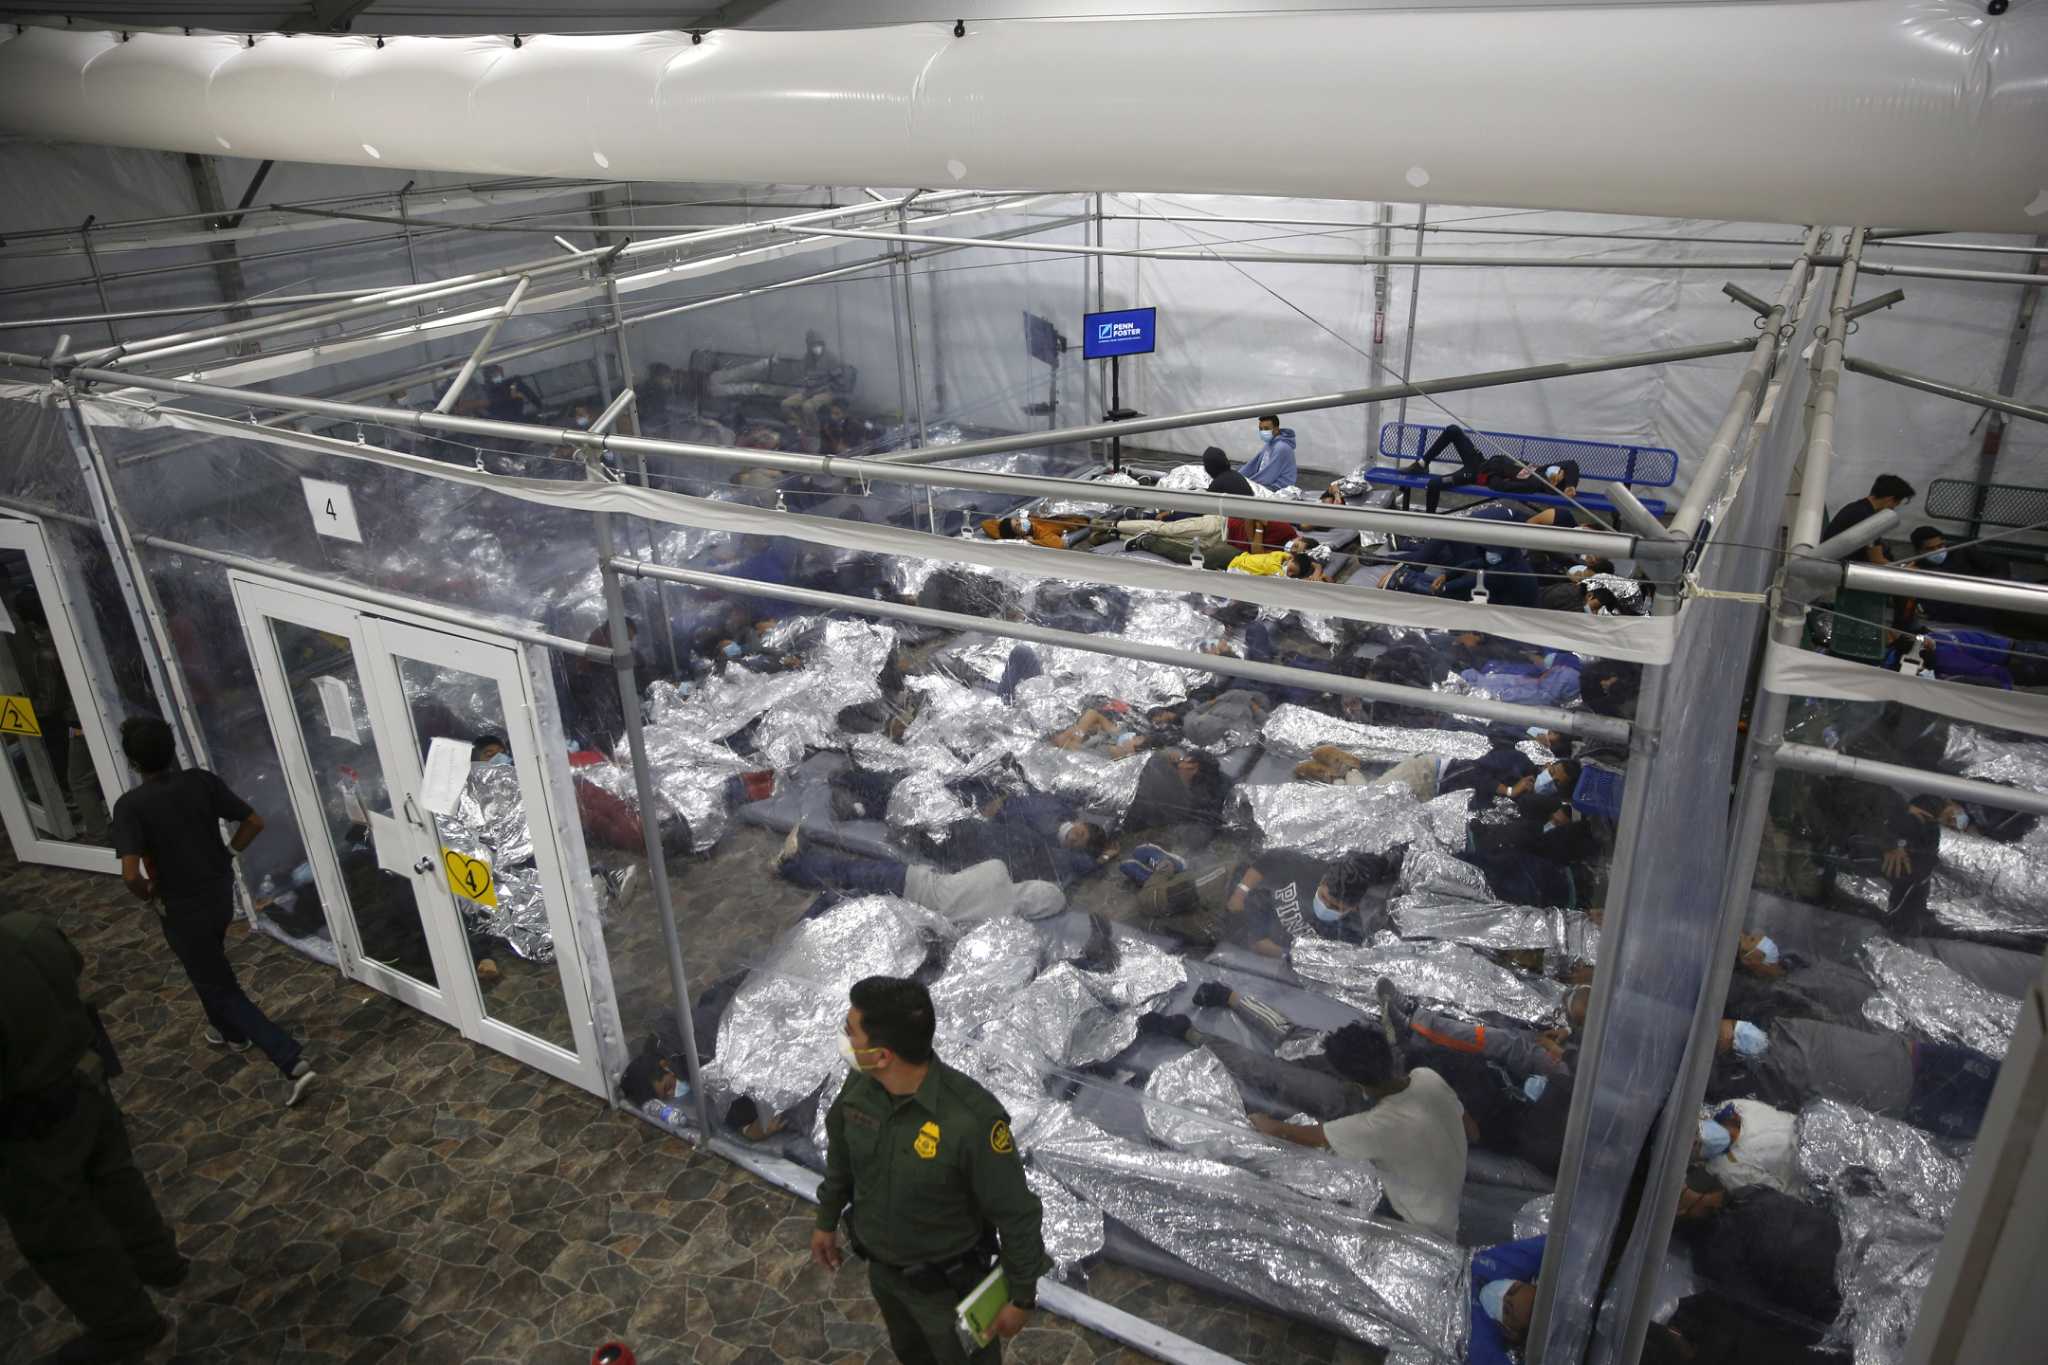 Does Biden’s immigration policy cause the rise of minors in the border?